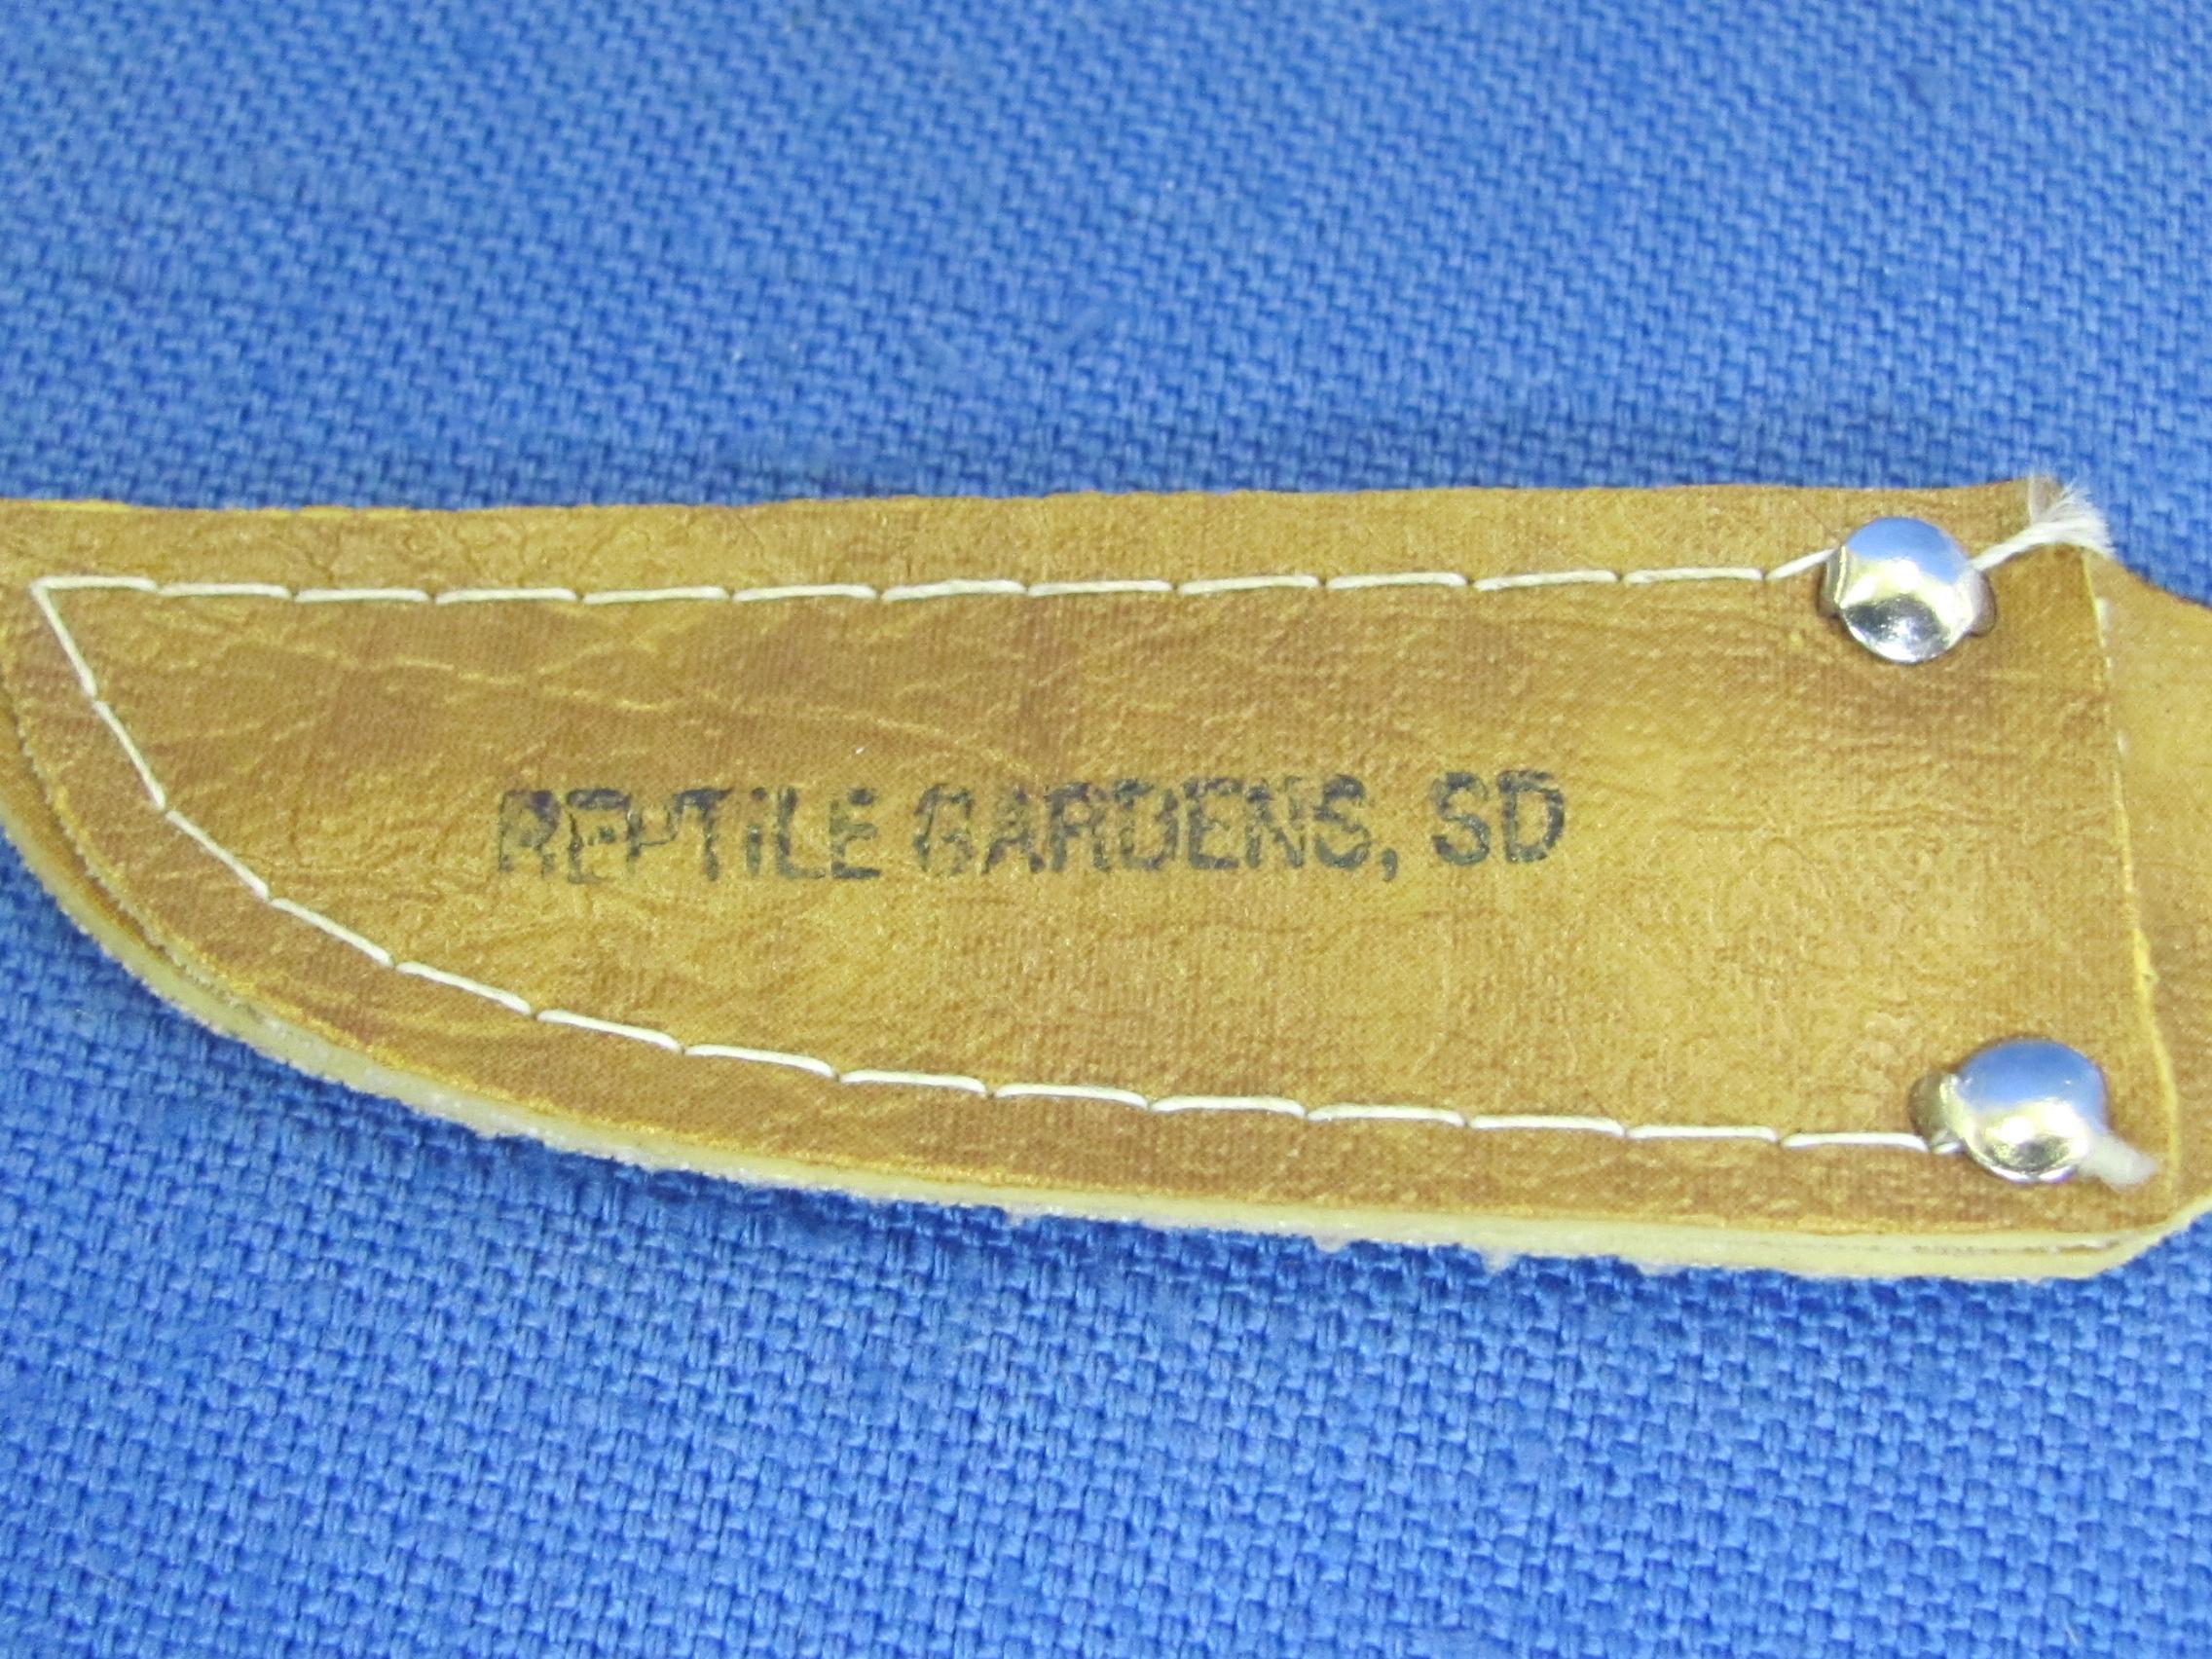 Small Fixed Blade Knife – Souvenir of Reptile Gardens, SD – Knife is 4 1/4” long